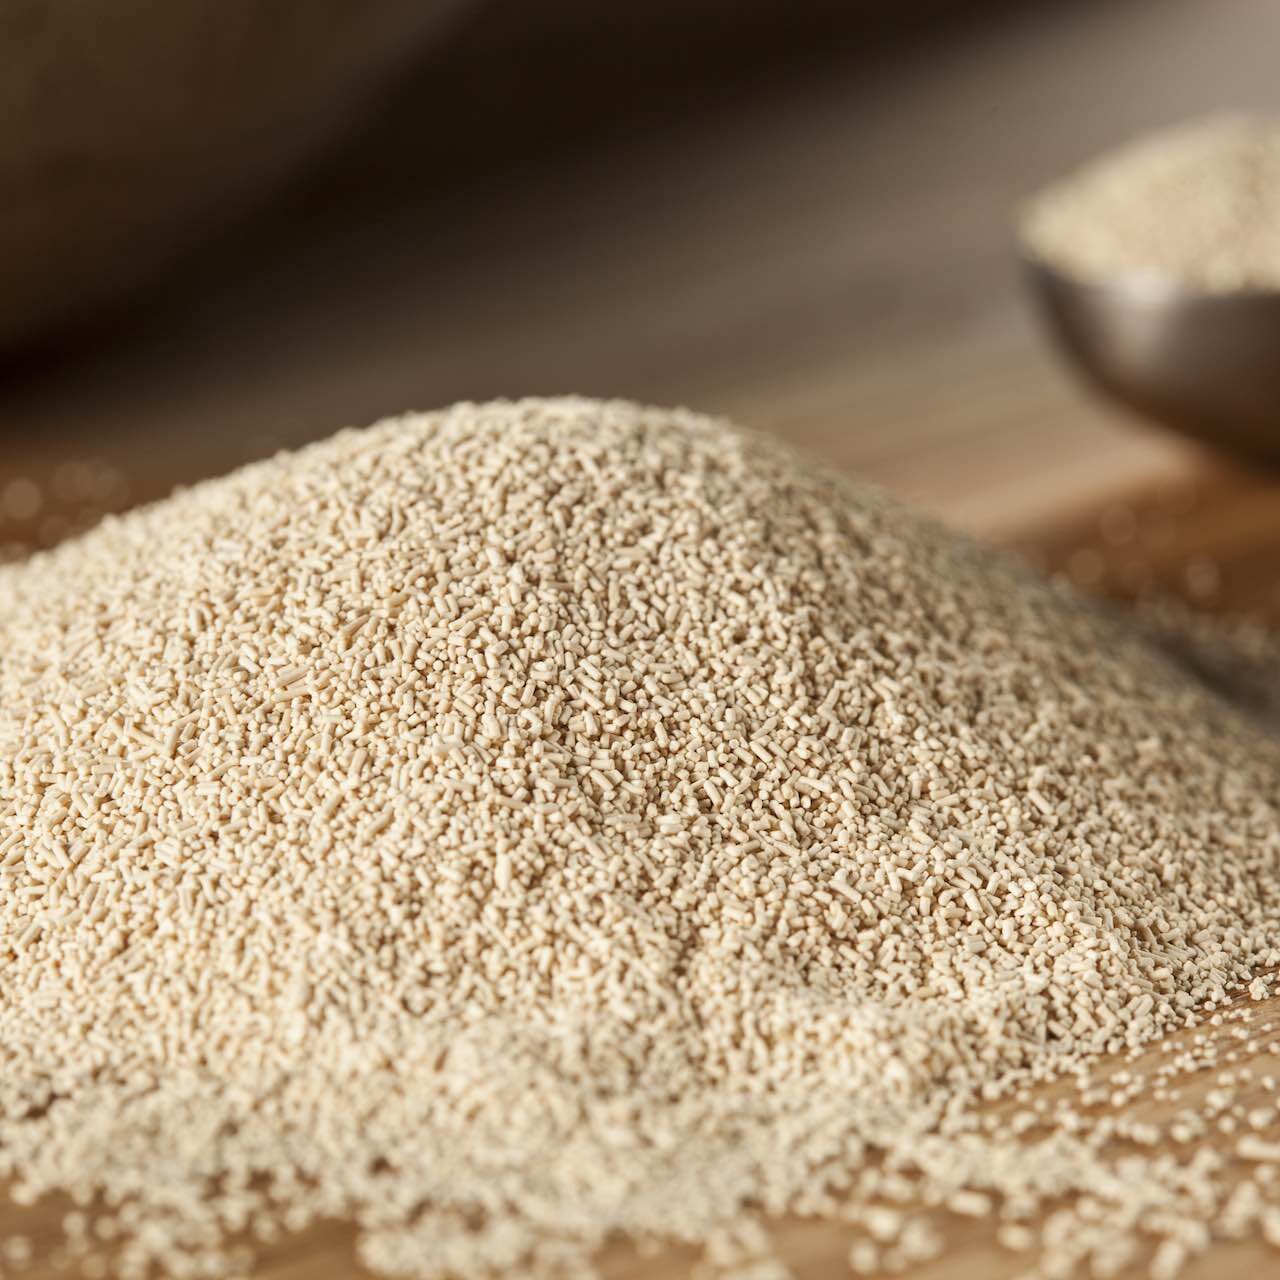 Organic Raw Yeast for baking bread against a background